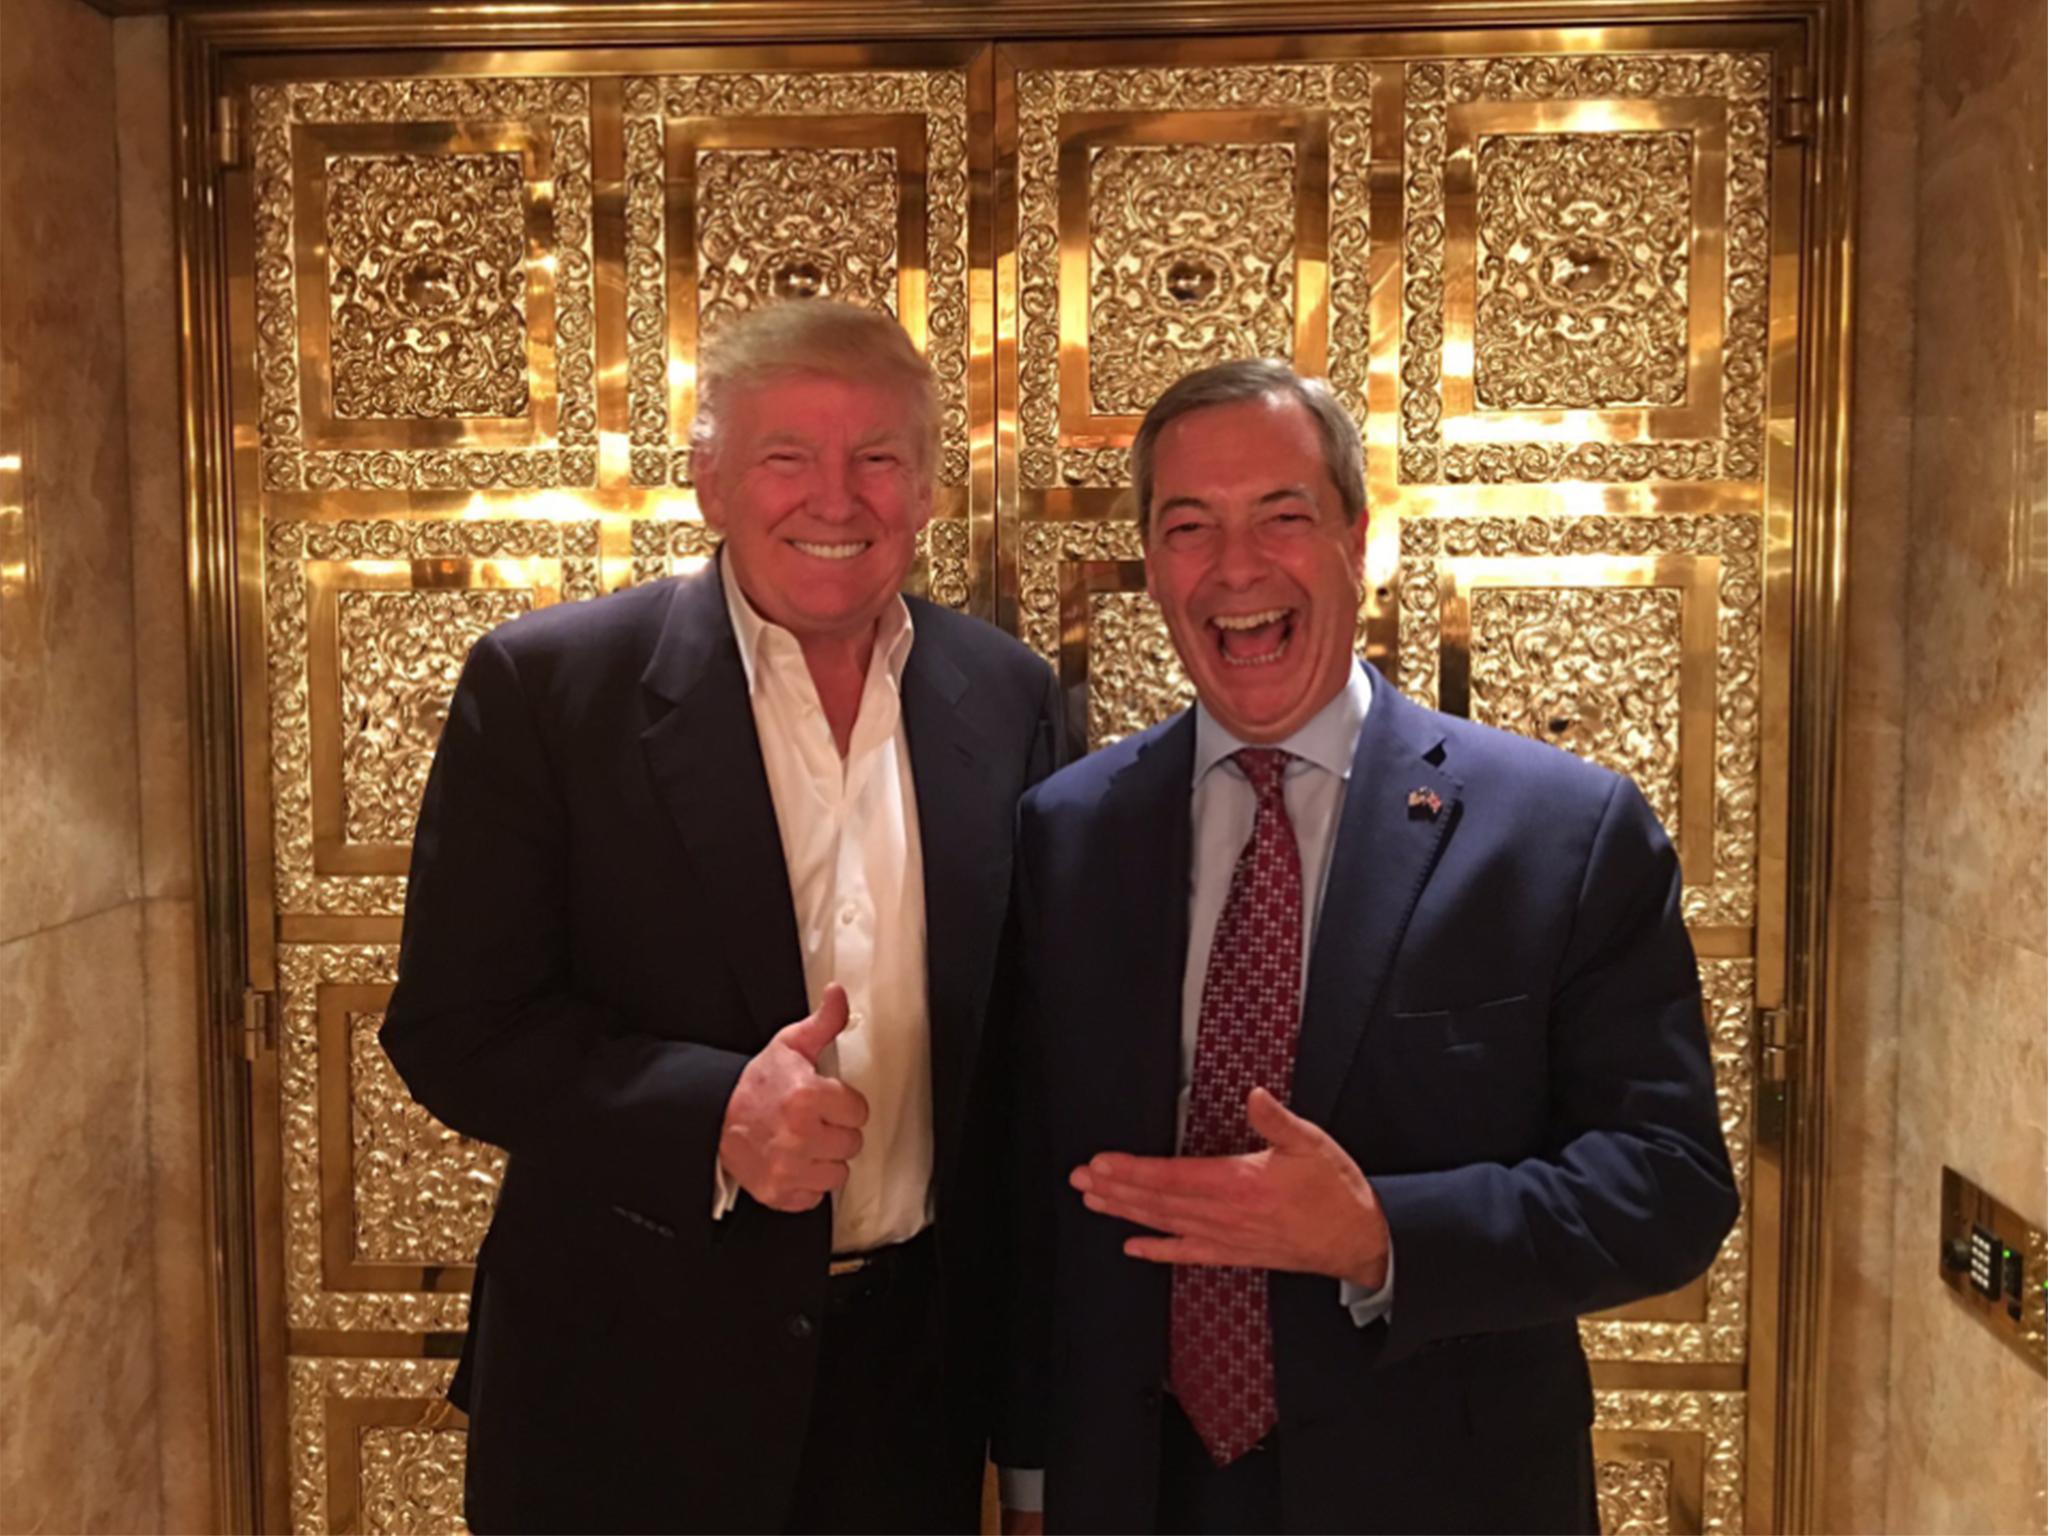 Rather than contest a seat at the UK general election, Nigel Farage says he will help Donald Trump with his latest White House run